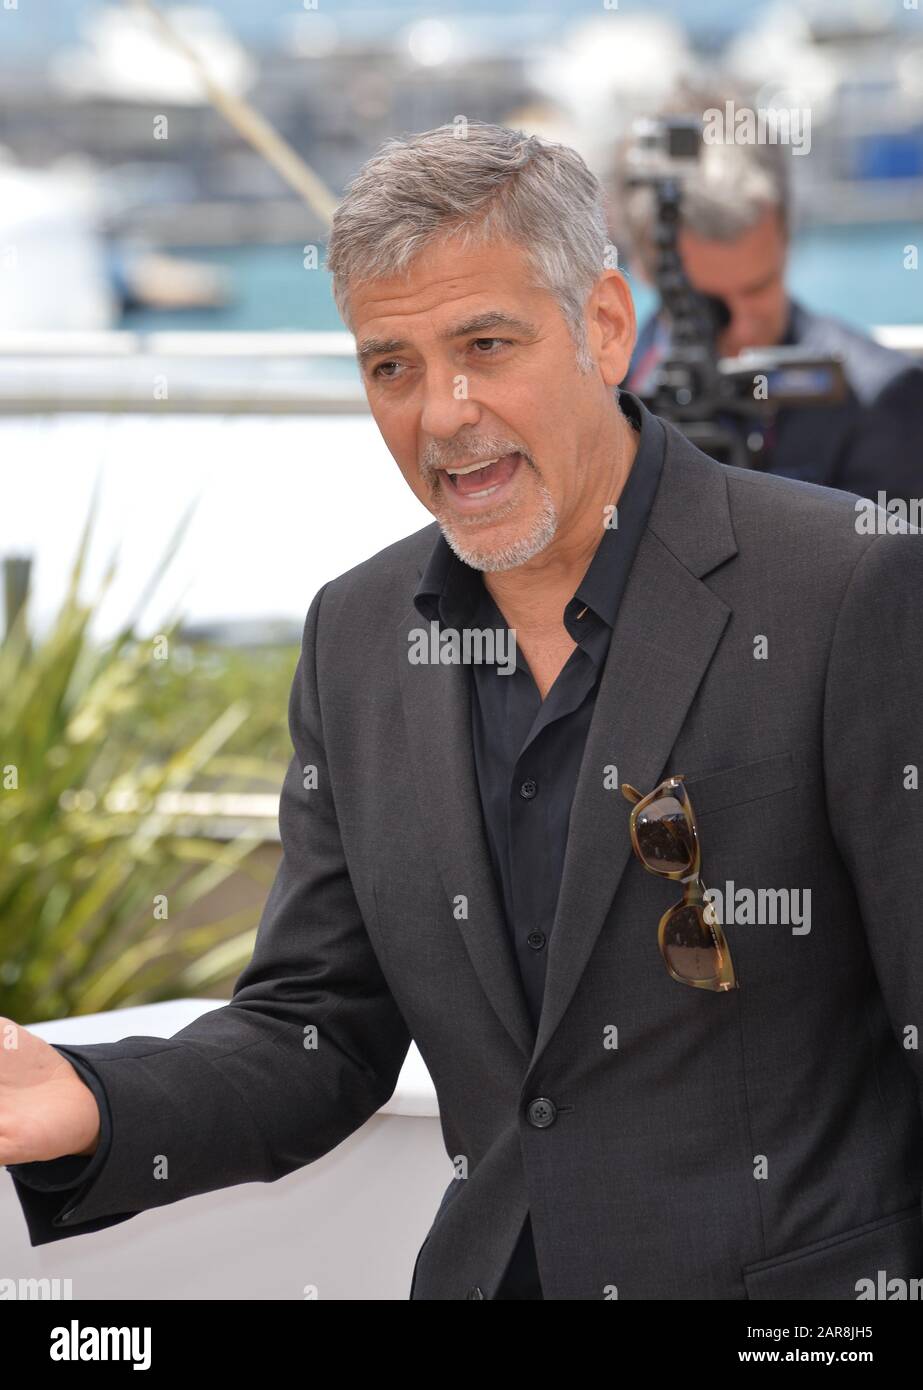 CANNES, FRANCE - MAY 12, 2016: Actor George Clooney at the photocall for 'Money Monster' at the 69th Festival de Cannes. Stock Photo